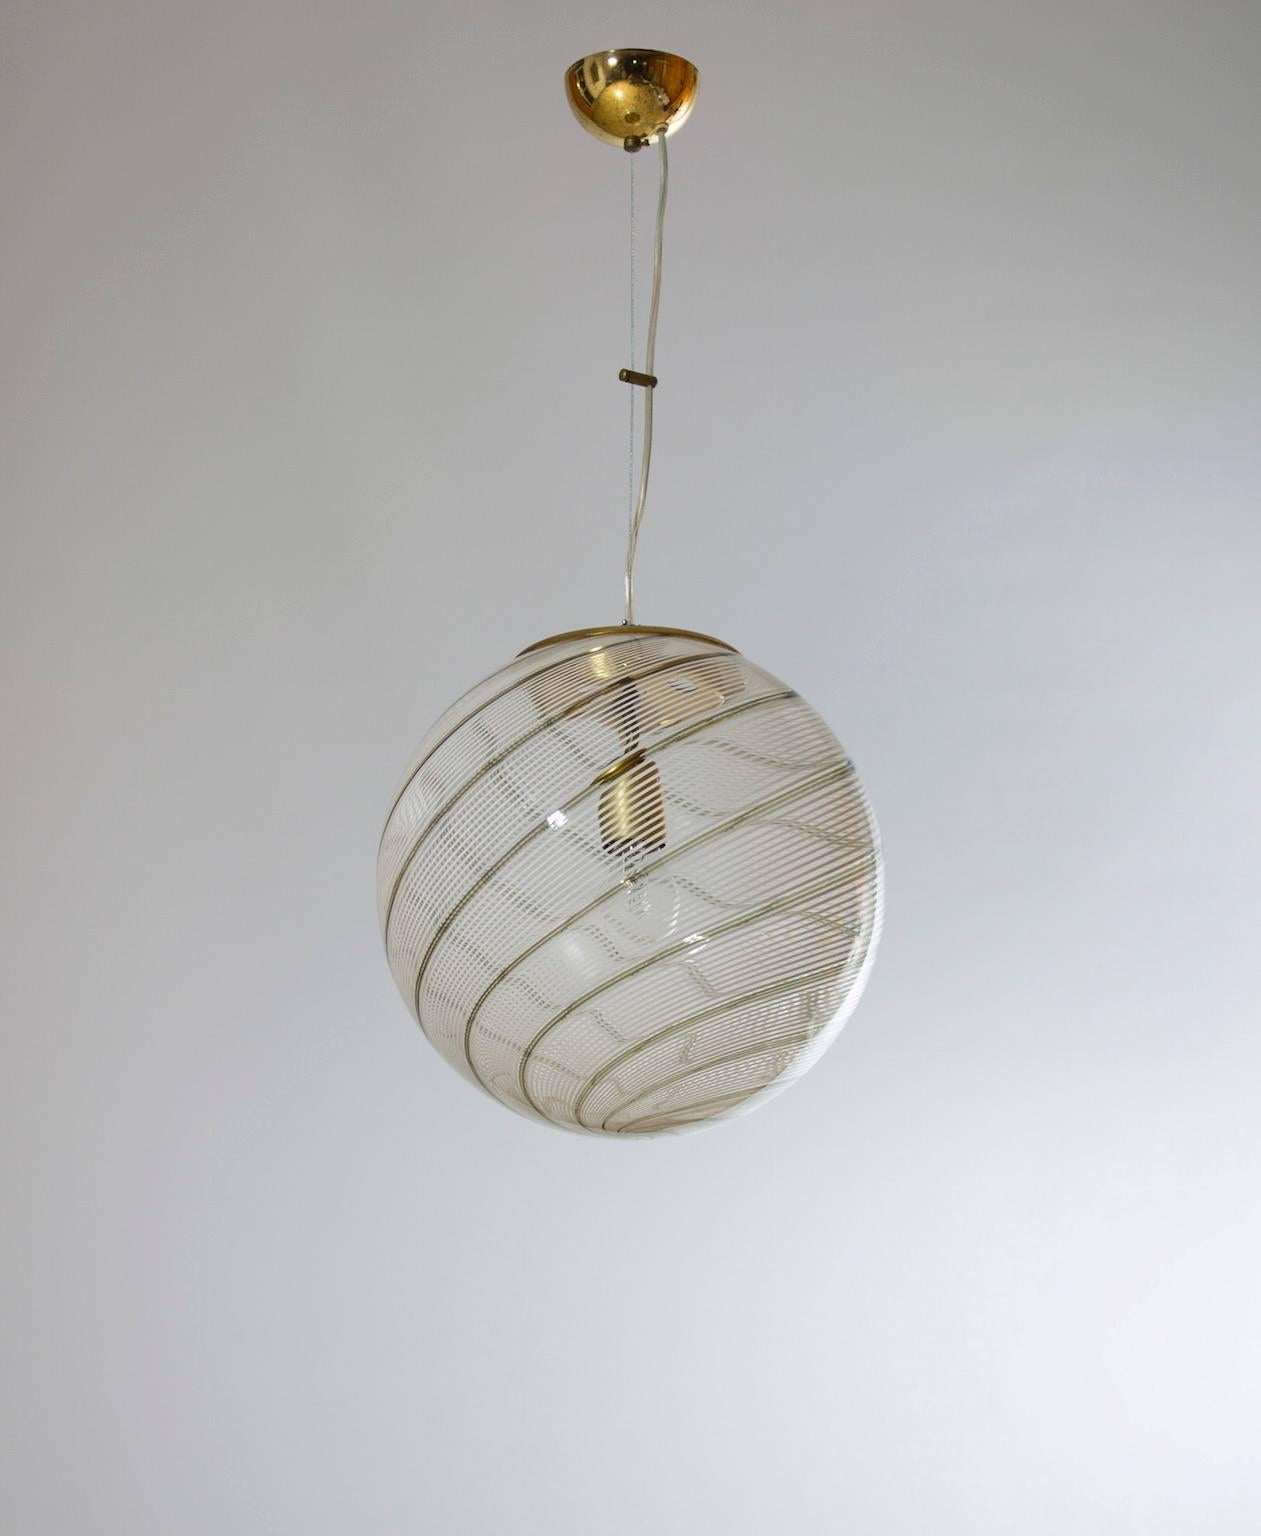 Vintage Murano Fixture: Clear Glass Sphere with Accented Stripes 1960s Italy.
A Timeless Murano Glass Sphere Fixture with Delicate Stripes: A Legacy of Venetian Artisanship. This exquisite Murano glass sphere fixture, crafted in the 1960s and